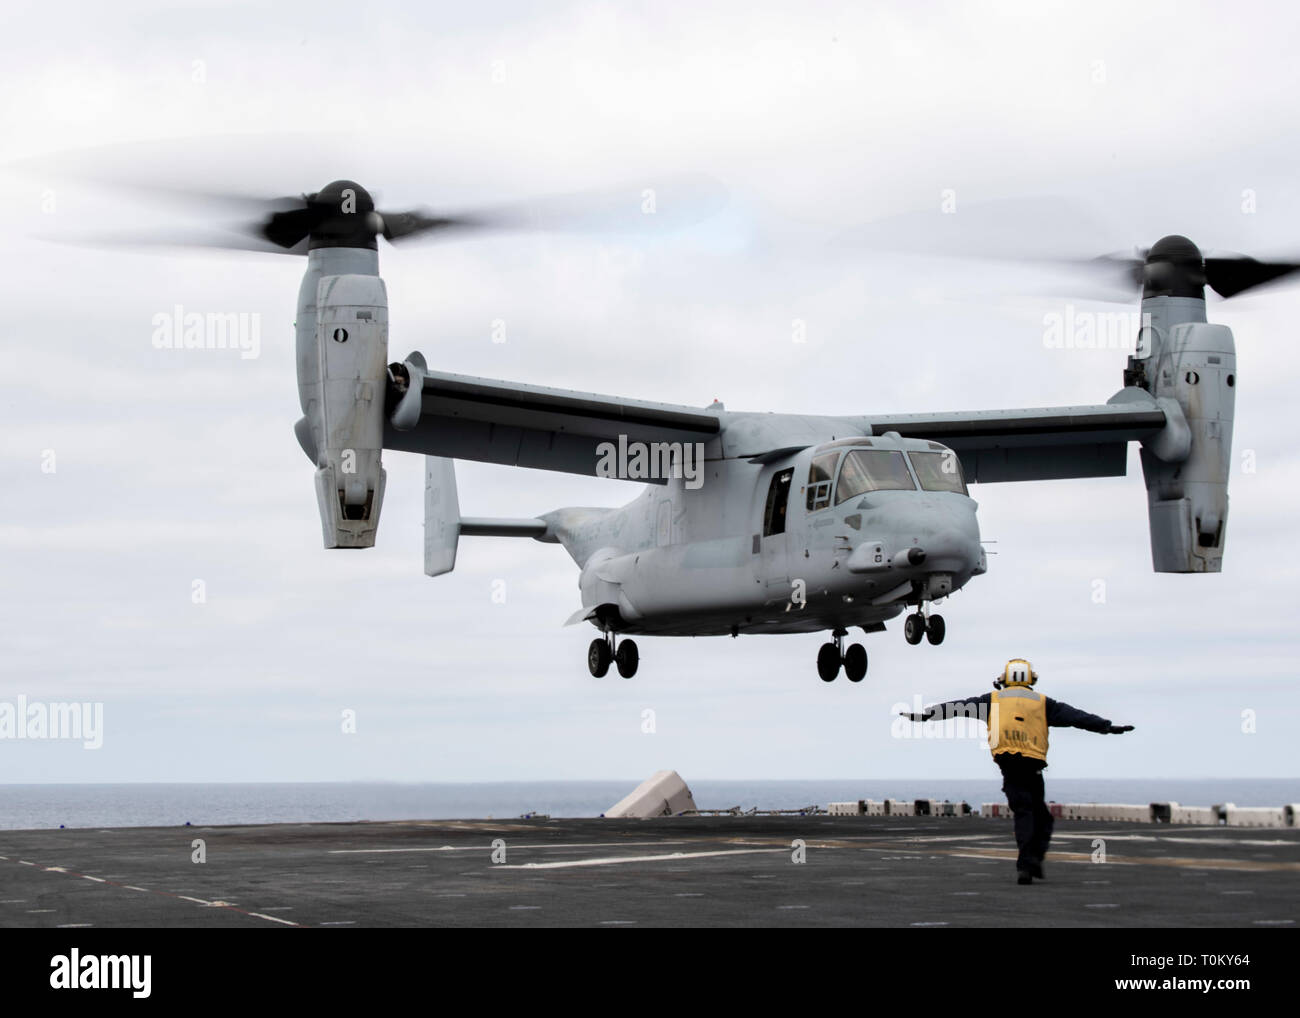 190319-N-IQ884-2106  PACIFIC OCEAN (March 19, 2019) Aviation Boatswain’s Mate (Handling) 3rd Class Michael Burns, from Jackson, Miss., assigned to amphibious assault ship USS Boxer (LHD 4) signals an MV-22B Osprey attached to Marine Medium Tiltrotor Squadron (VMM) 163 as it lands on the flight deck. Boxer is underway conducting routine operations as a part of USS Boxer Amphibious Ready Group (ARG) in the eastern Pacific Ocean. (U.S. Navy photo by Mass Communication Specialist 2nd Class Dale M. Hopkins) Stock Photo